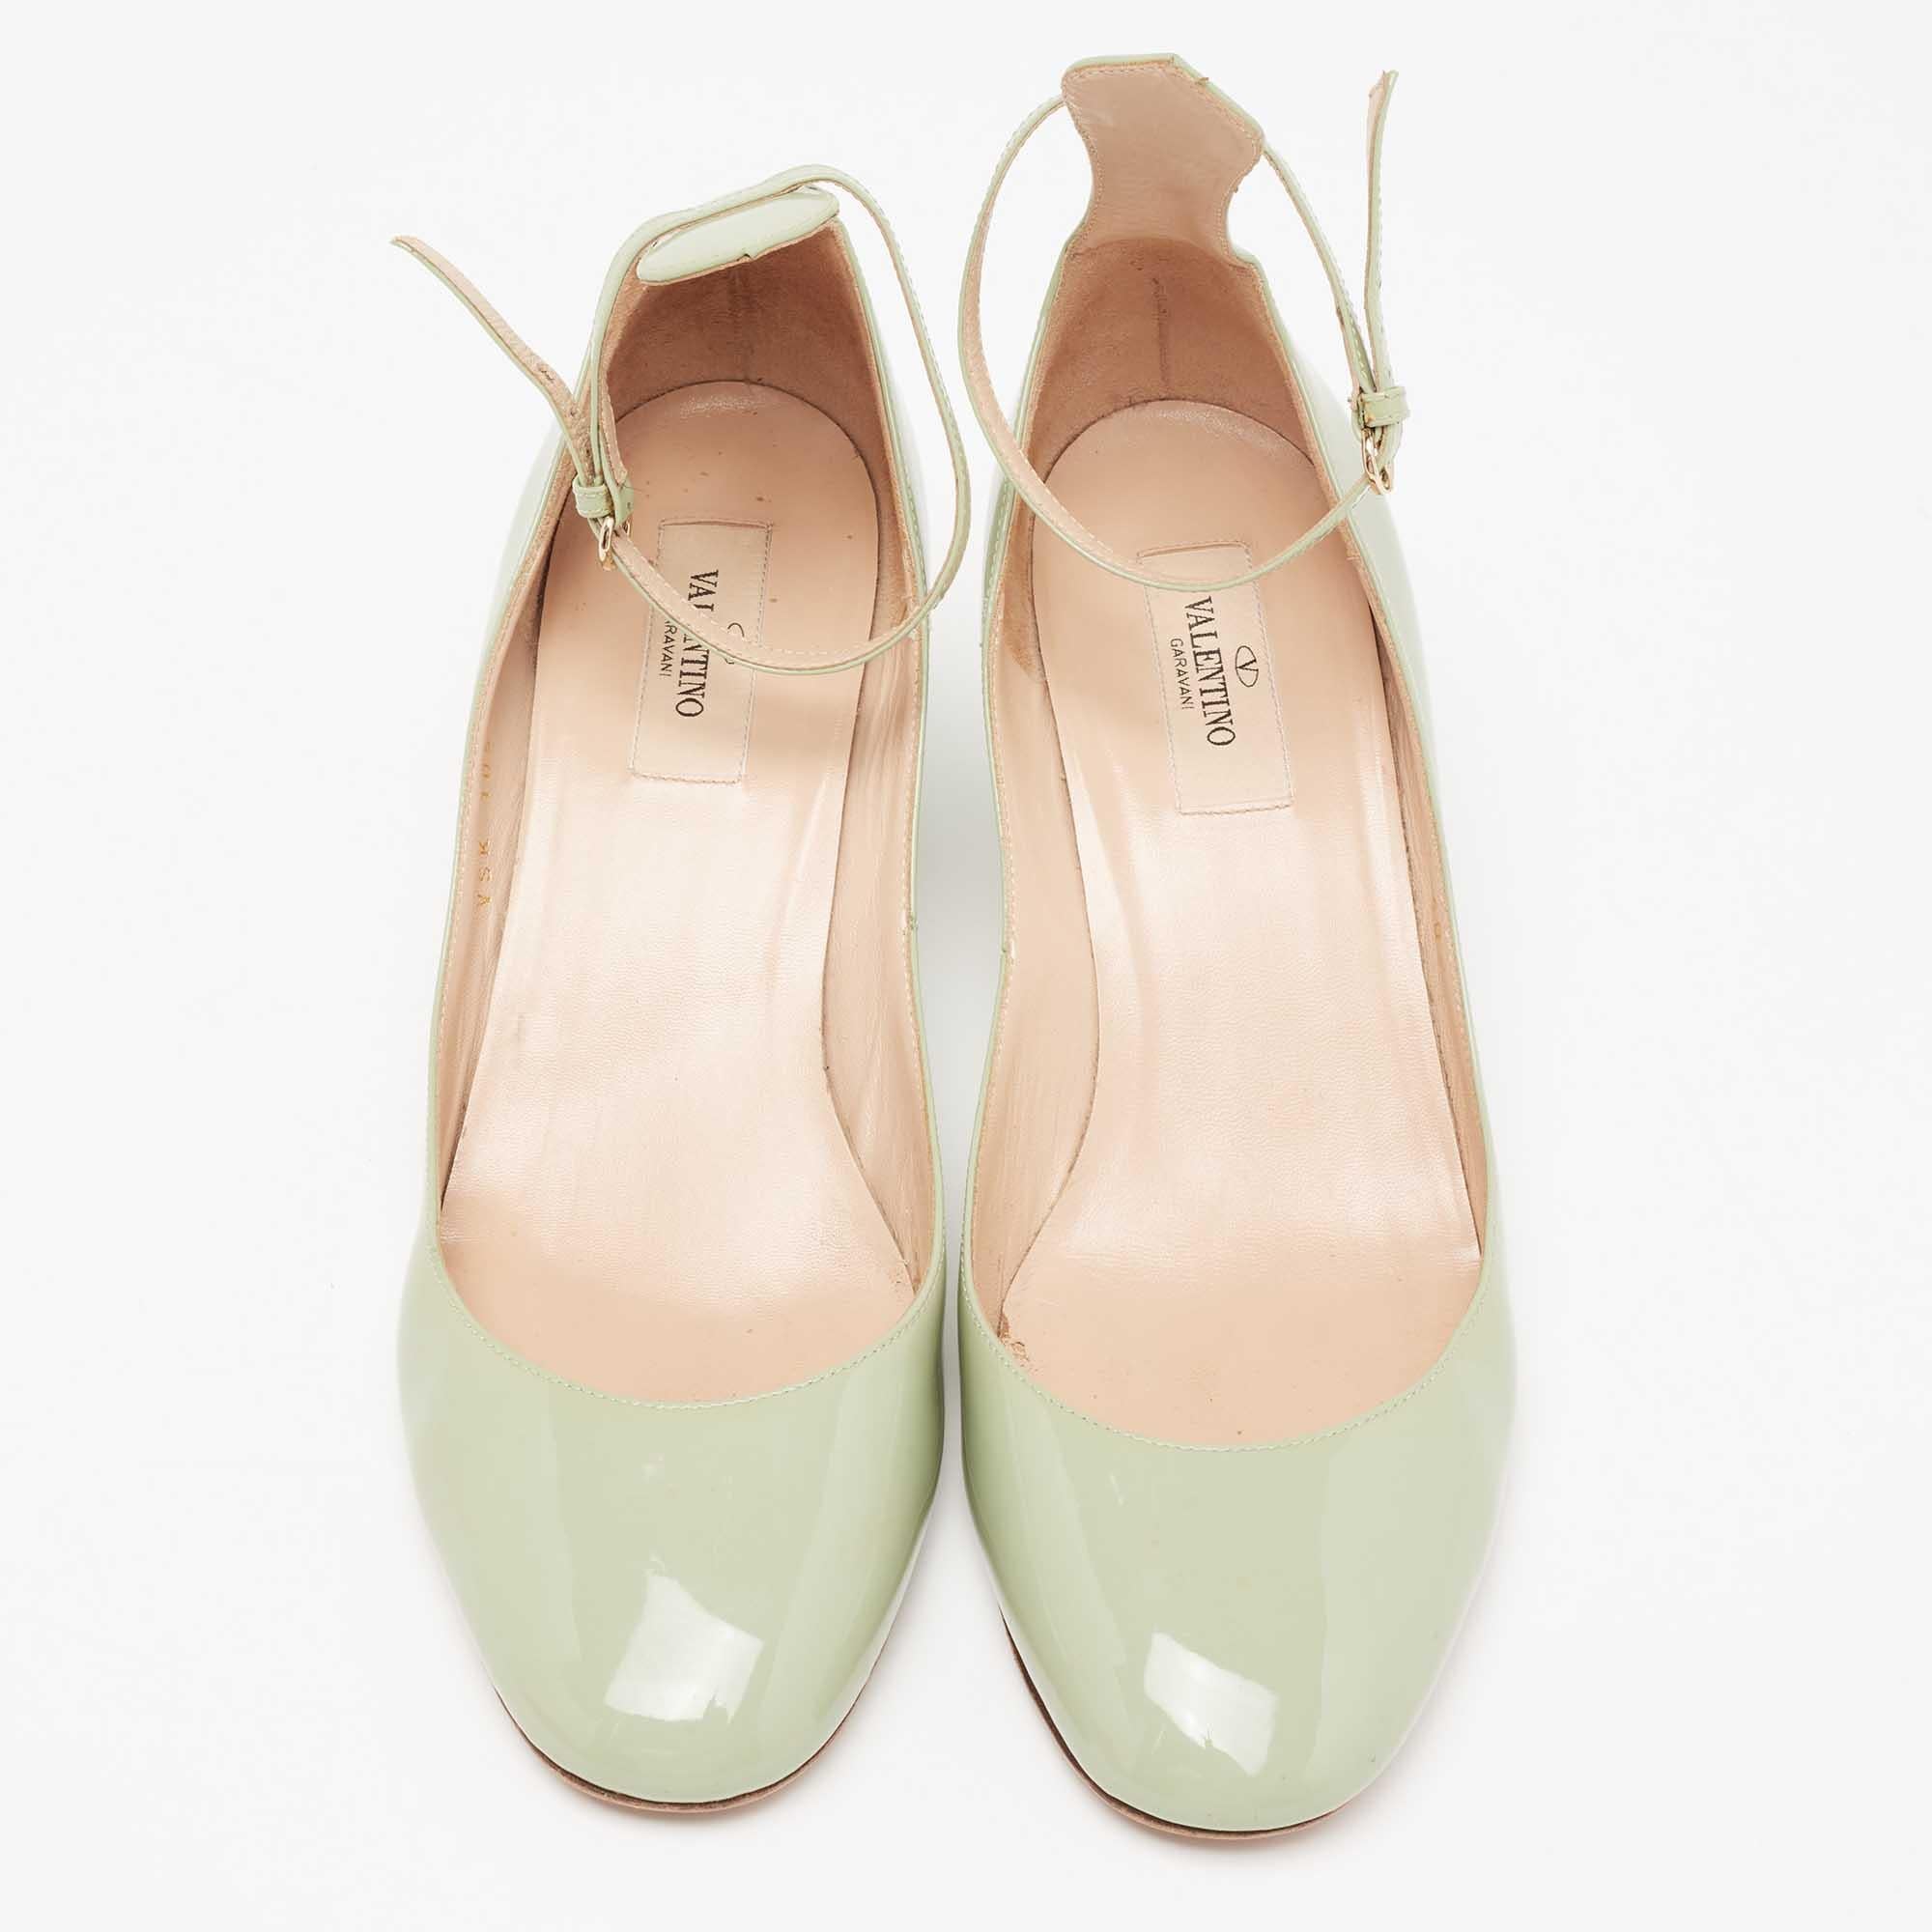 These Valentino pumps exude a refined style and sophisticated vibe with their minimal design. Crafted from patent leather, they have covered toes and buckled ankle fastening. These beauties are finished off with block heels and comfortable